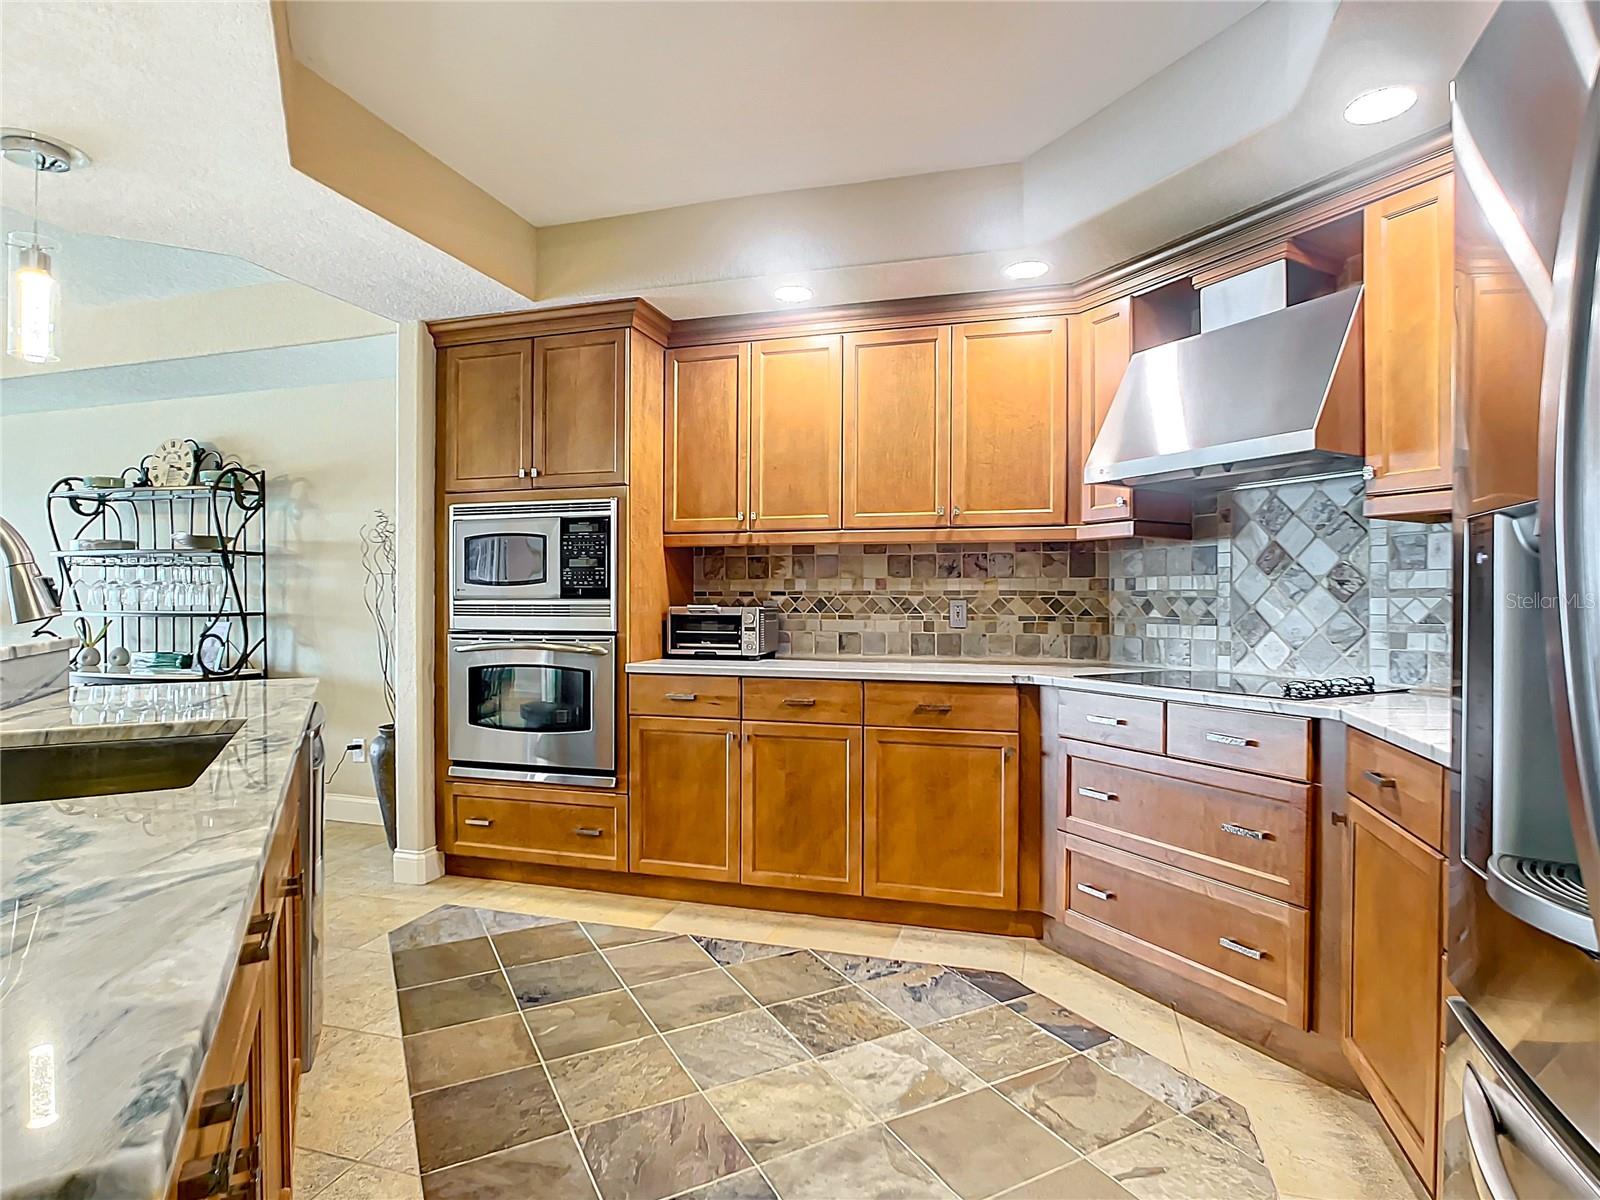 Your kitchen has ample cabinets & counter space for the gourmet cook.